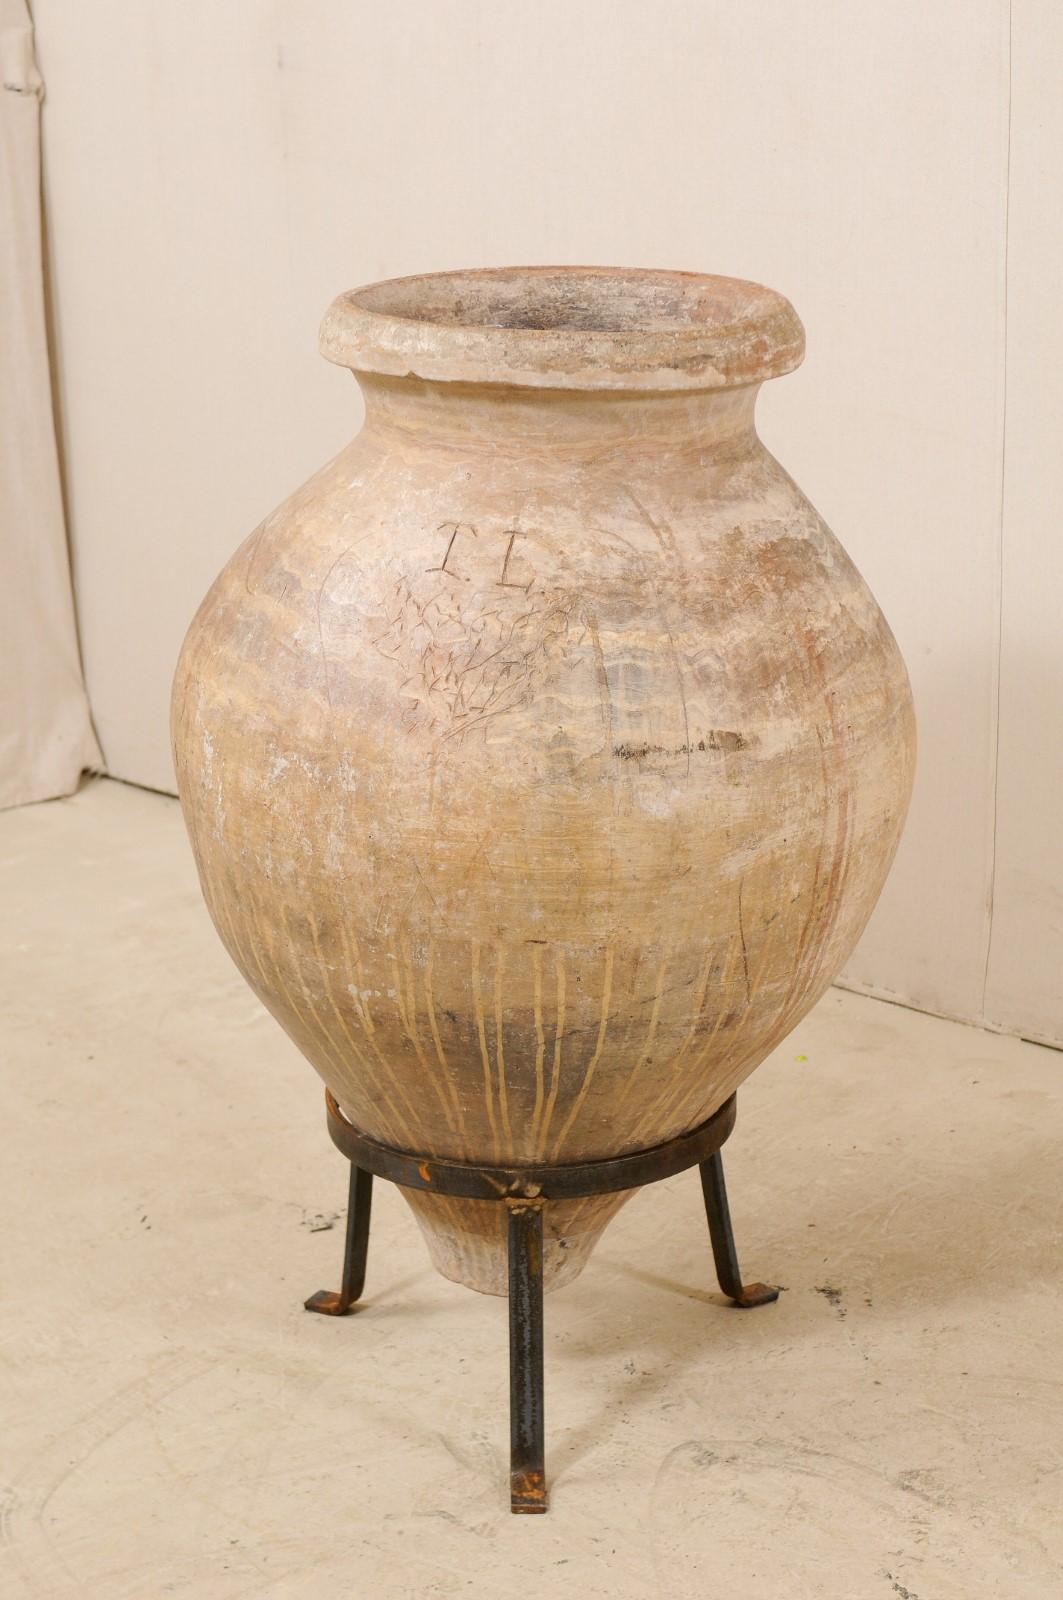 Spanish Large-Sized Olive Jar on Stand from 19th Century on Custom Stand 7